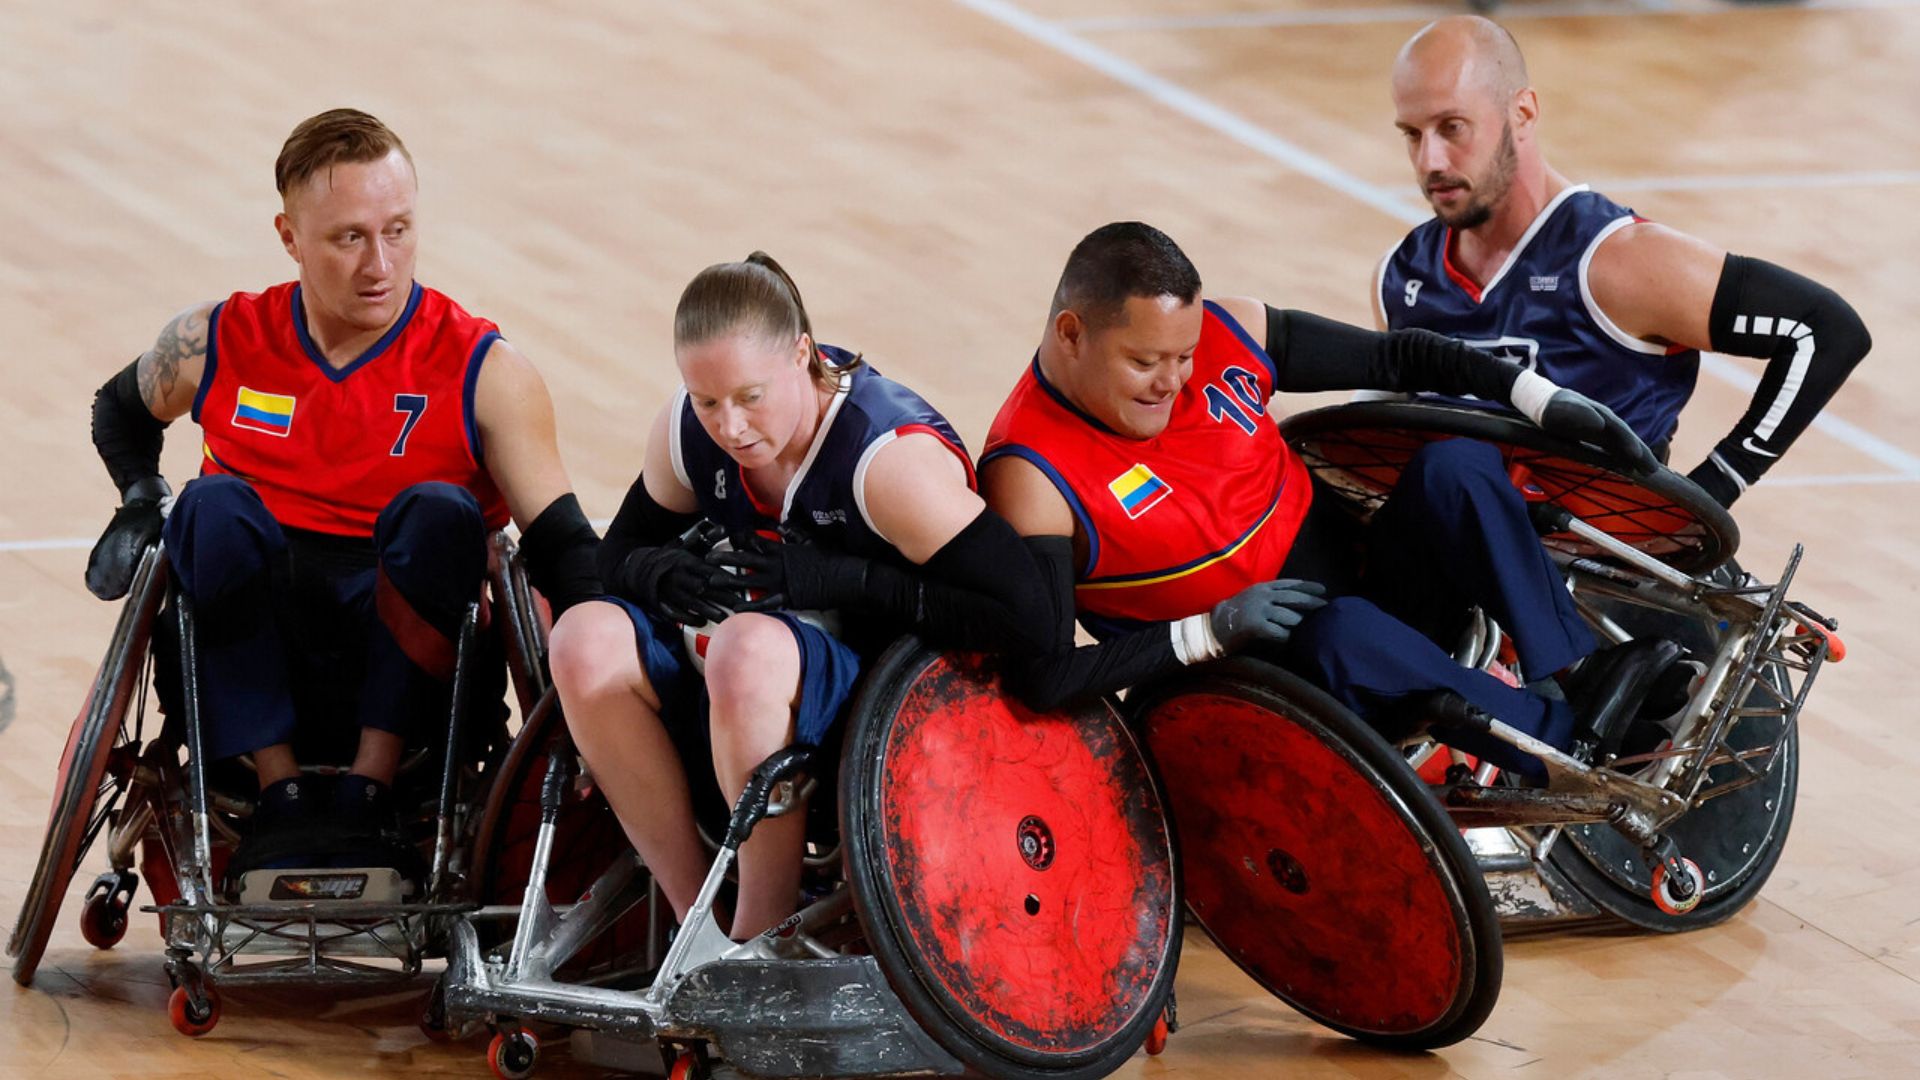 The United States Defeats Colombia in Wheelchair Rugby